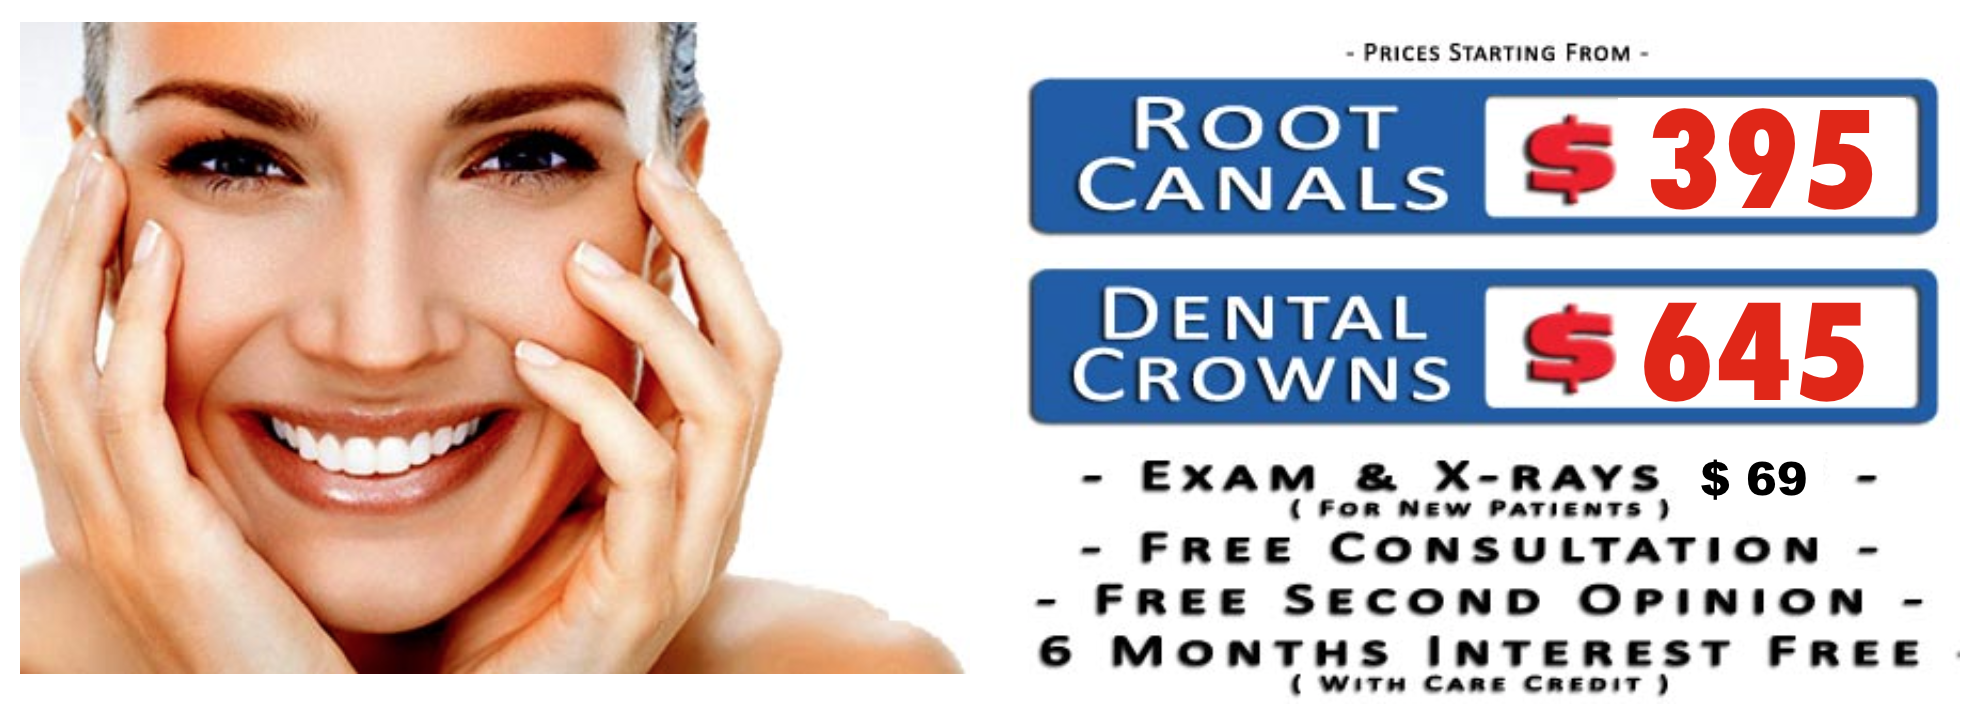 The Most Affordable Dentistry In The Phoenix Area!